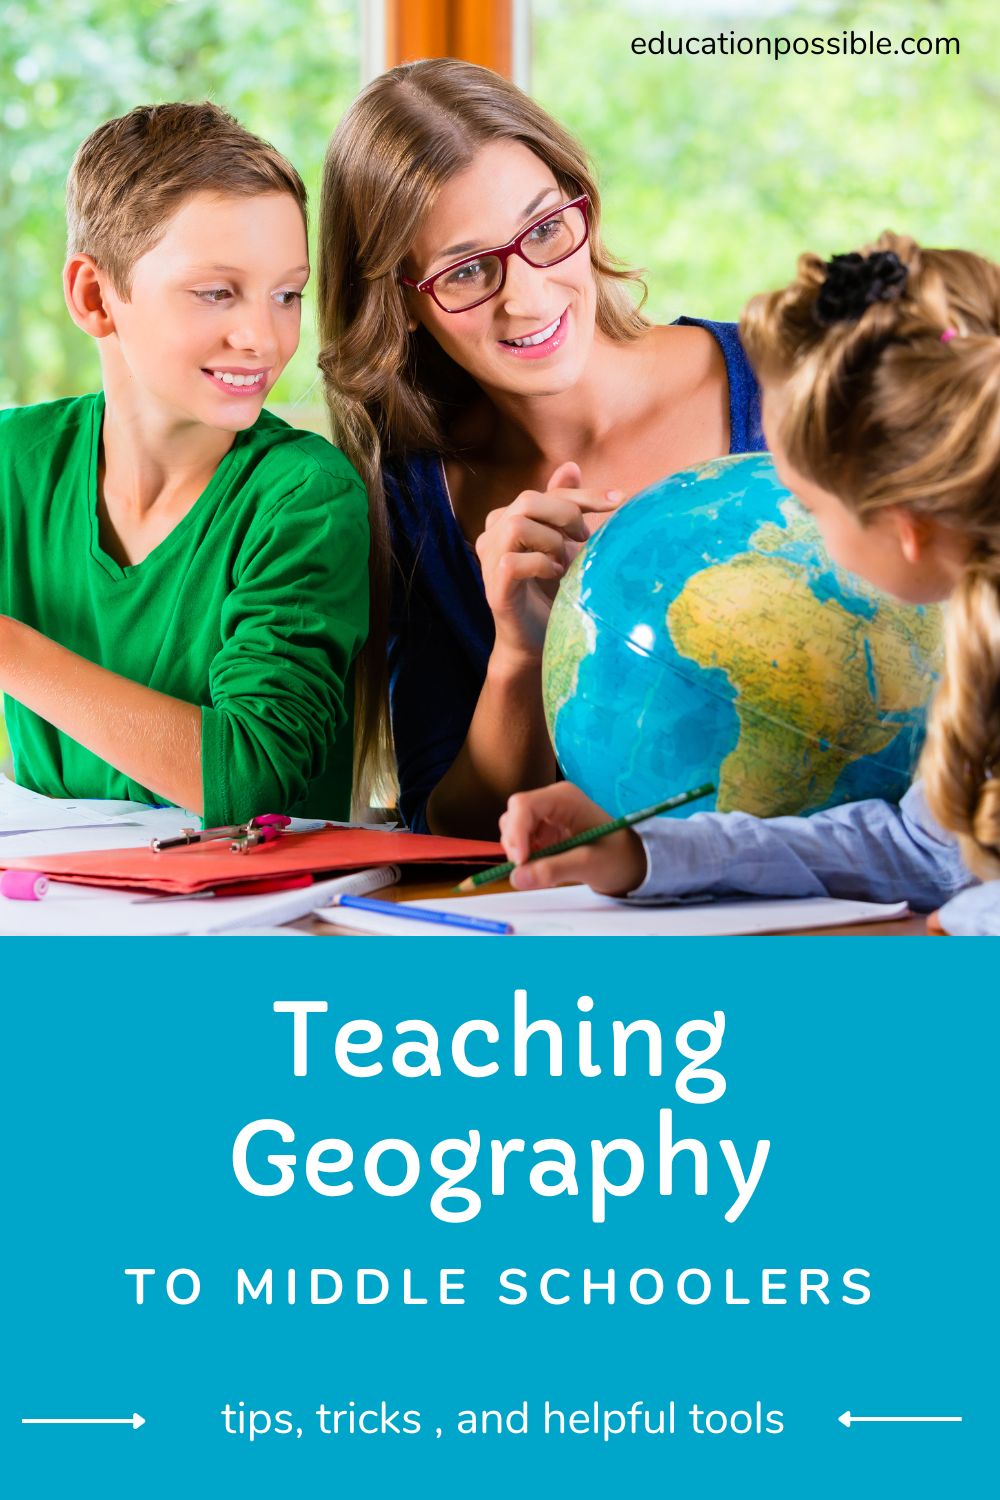 Teaching Geography to Middle School Students